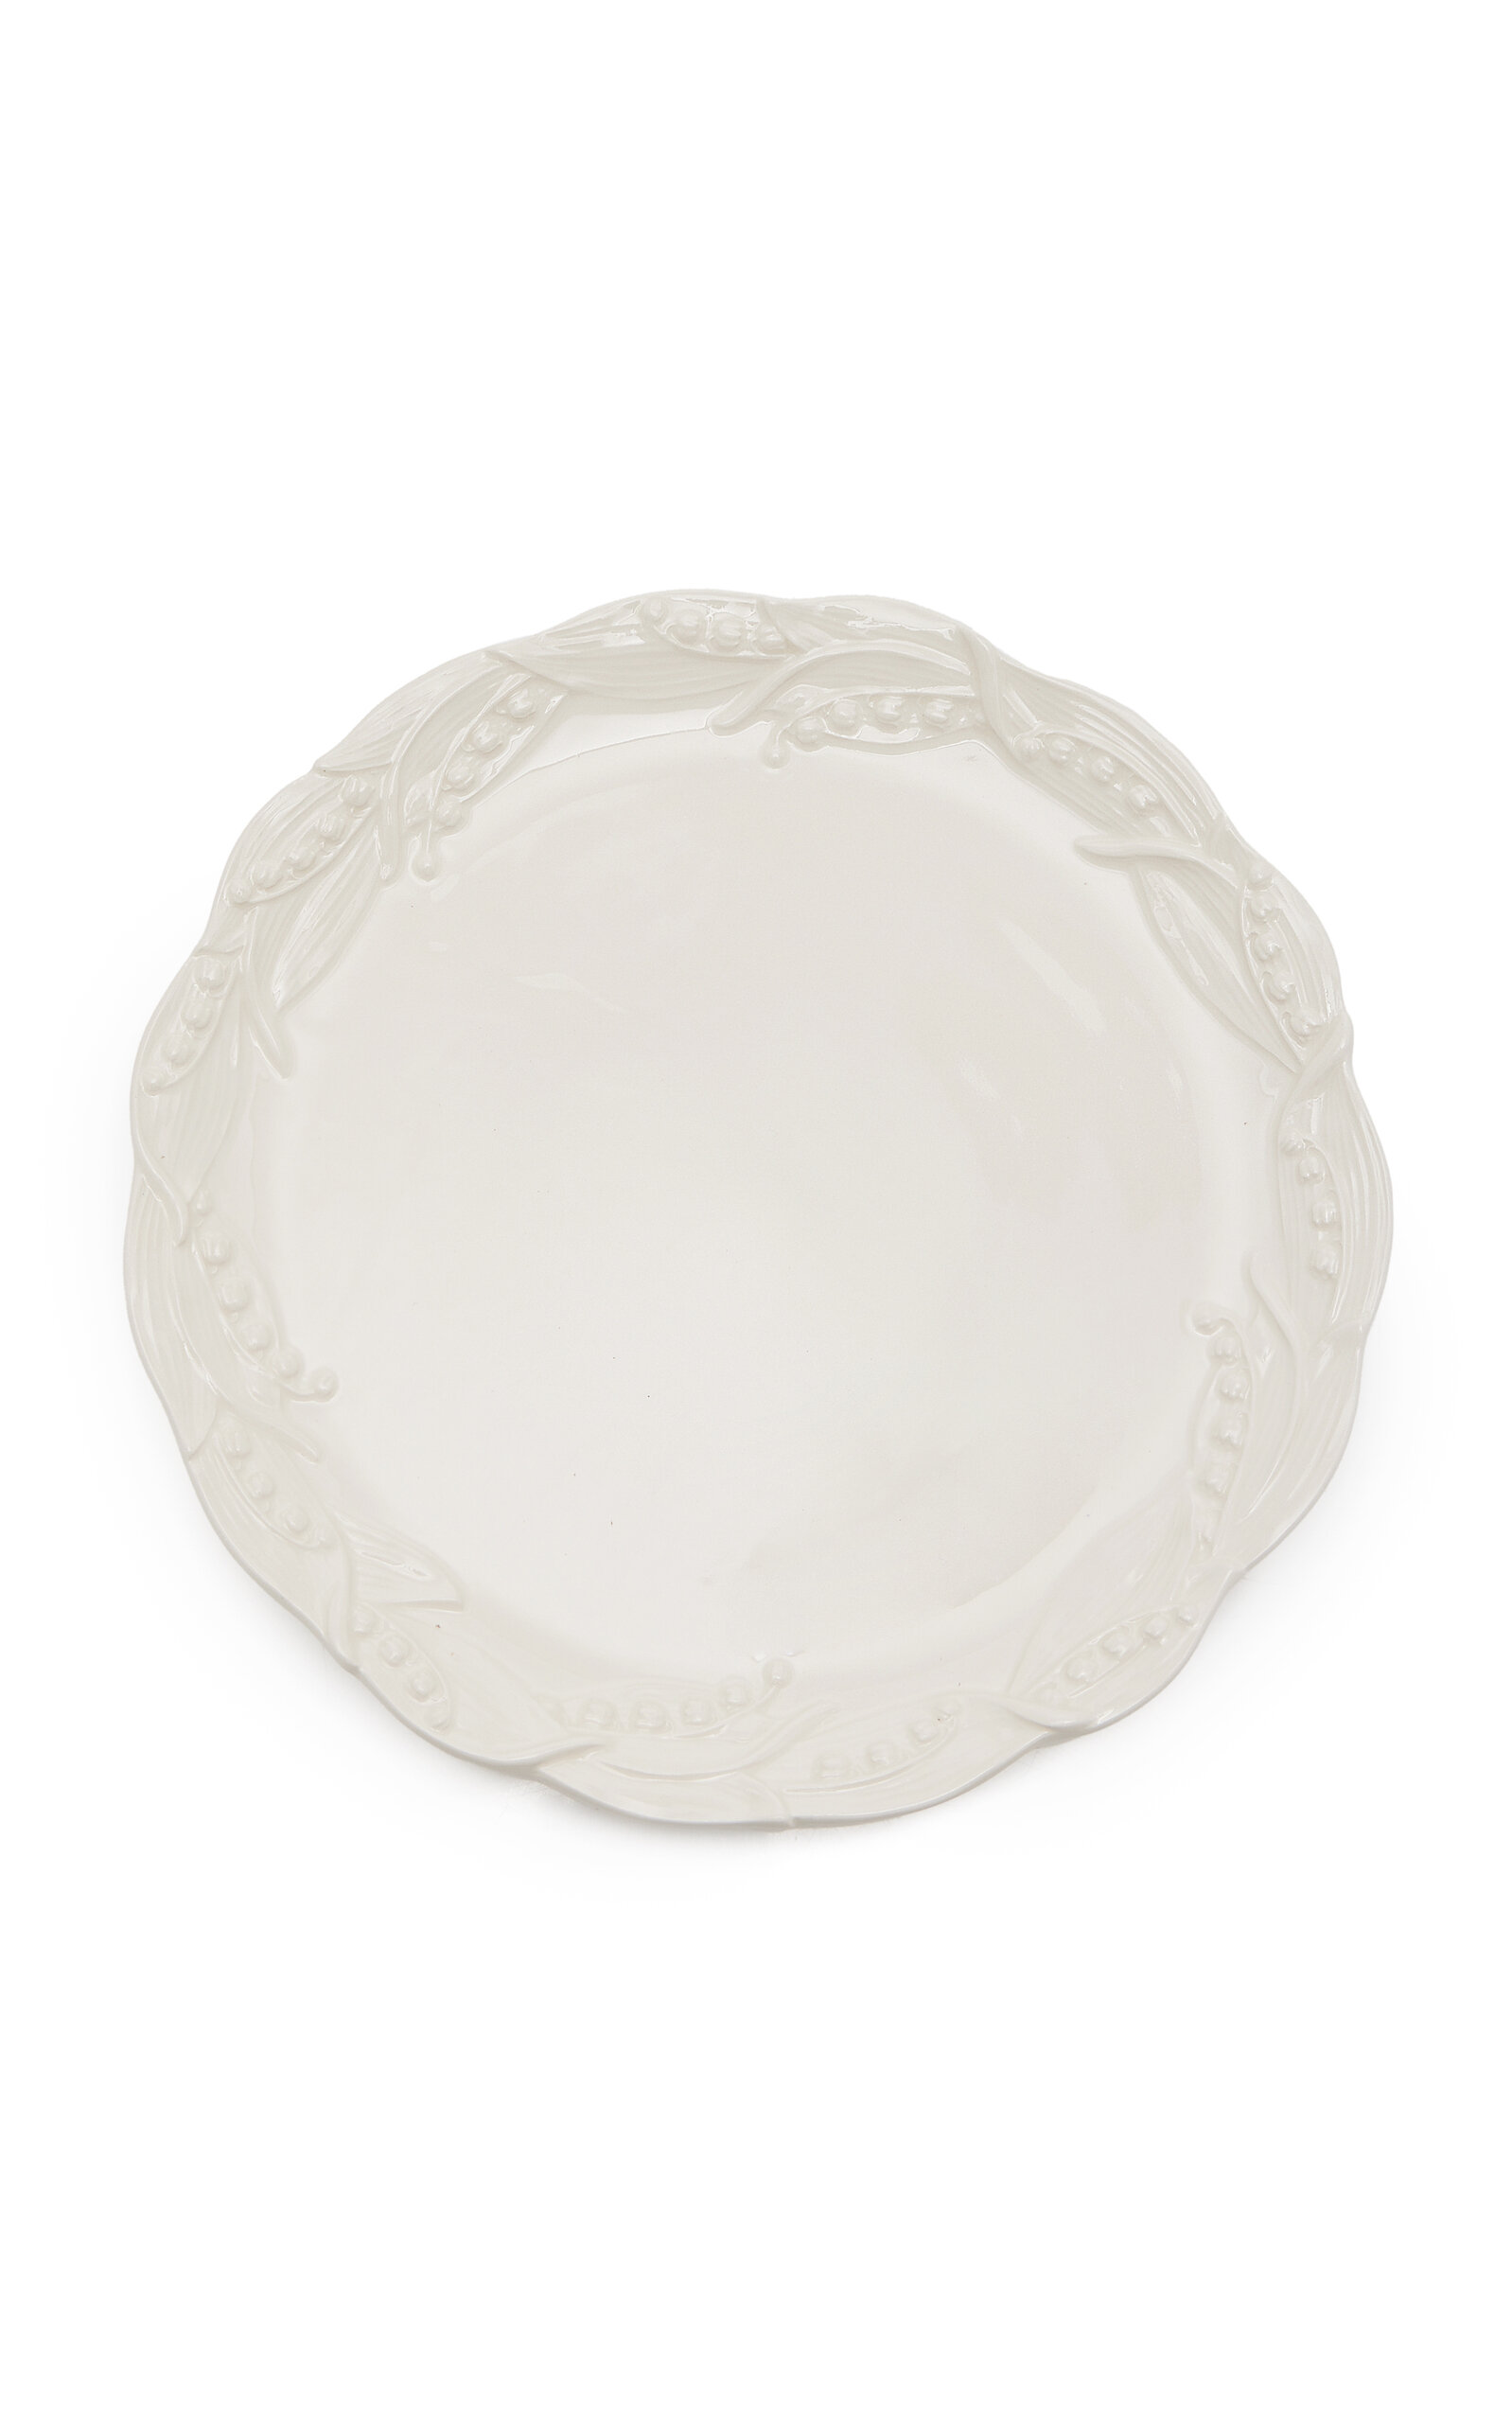 Moda Domus Lily Of The Valley Ceramic Serving Plate In White